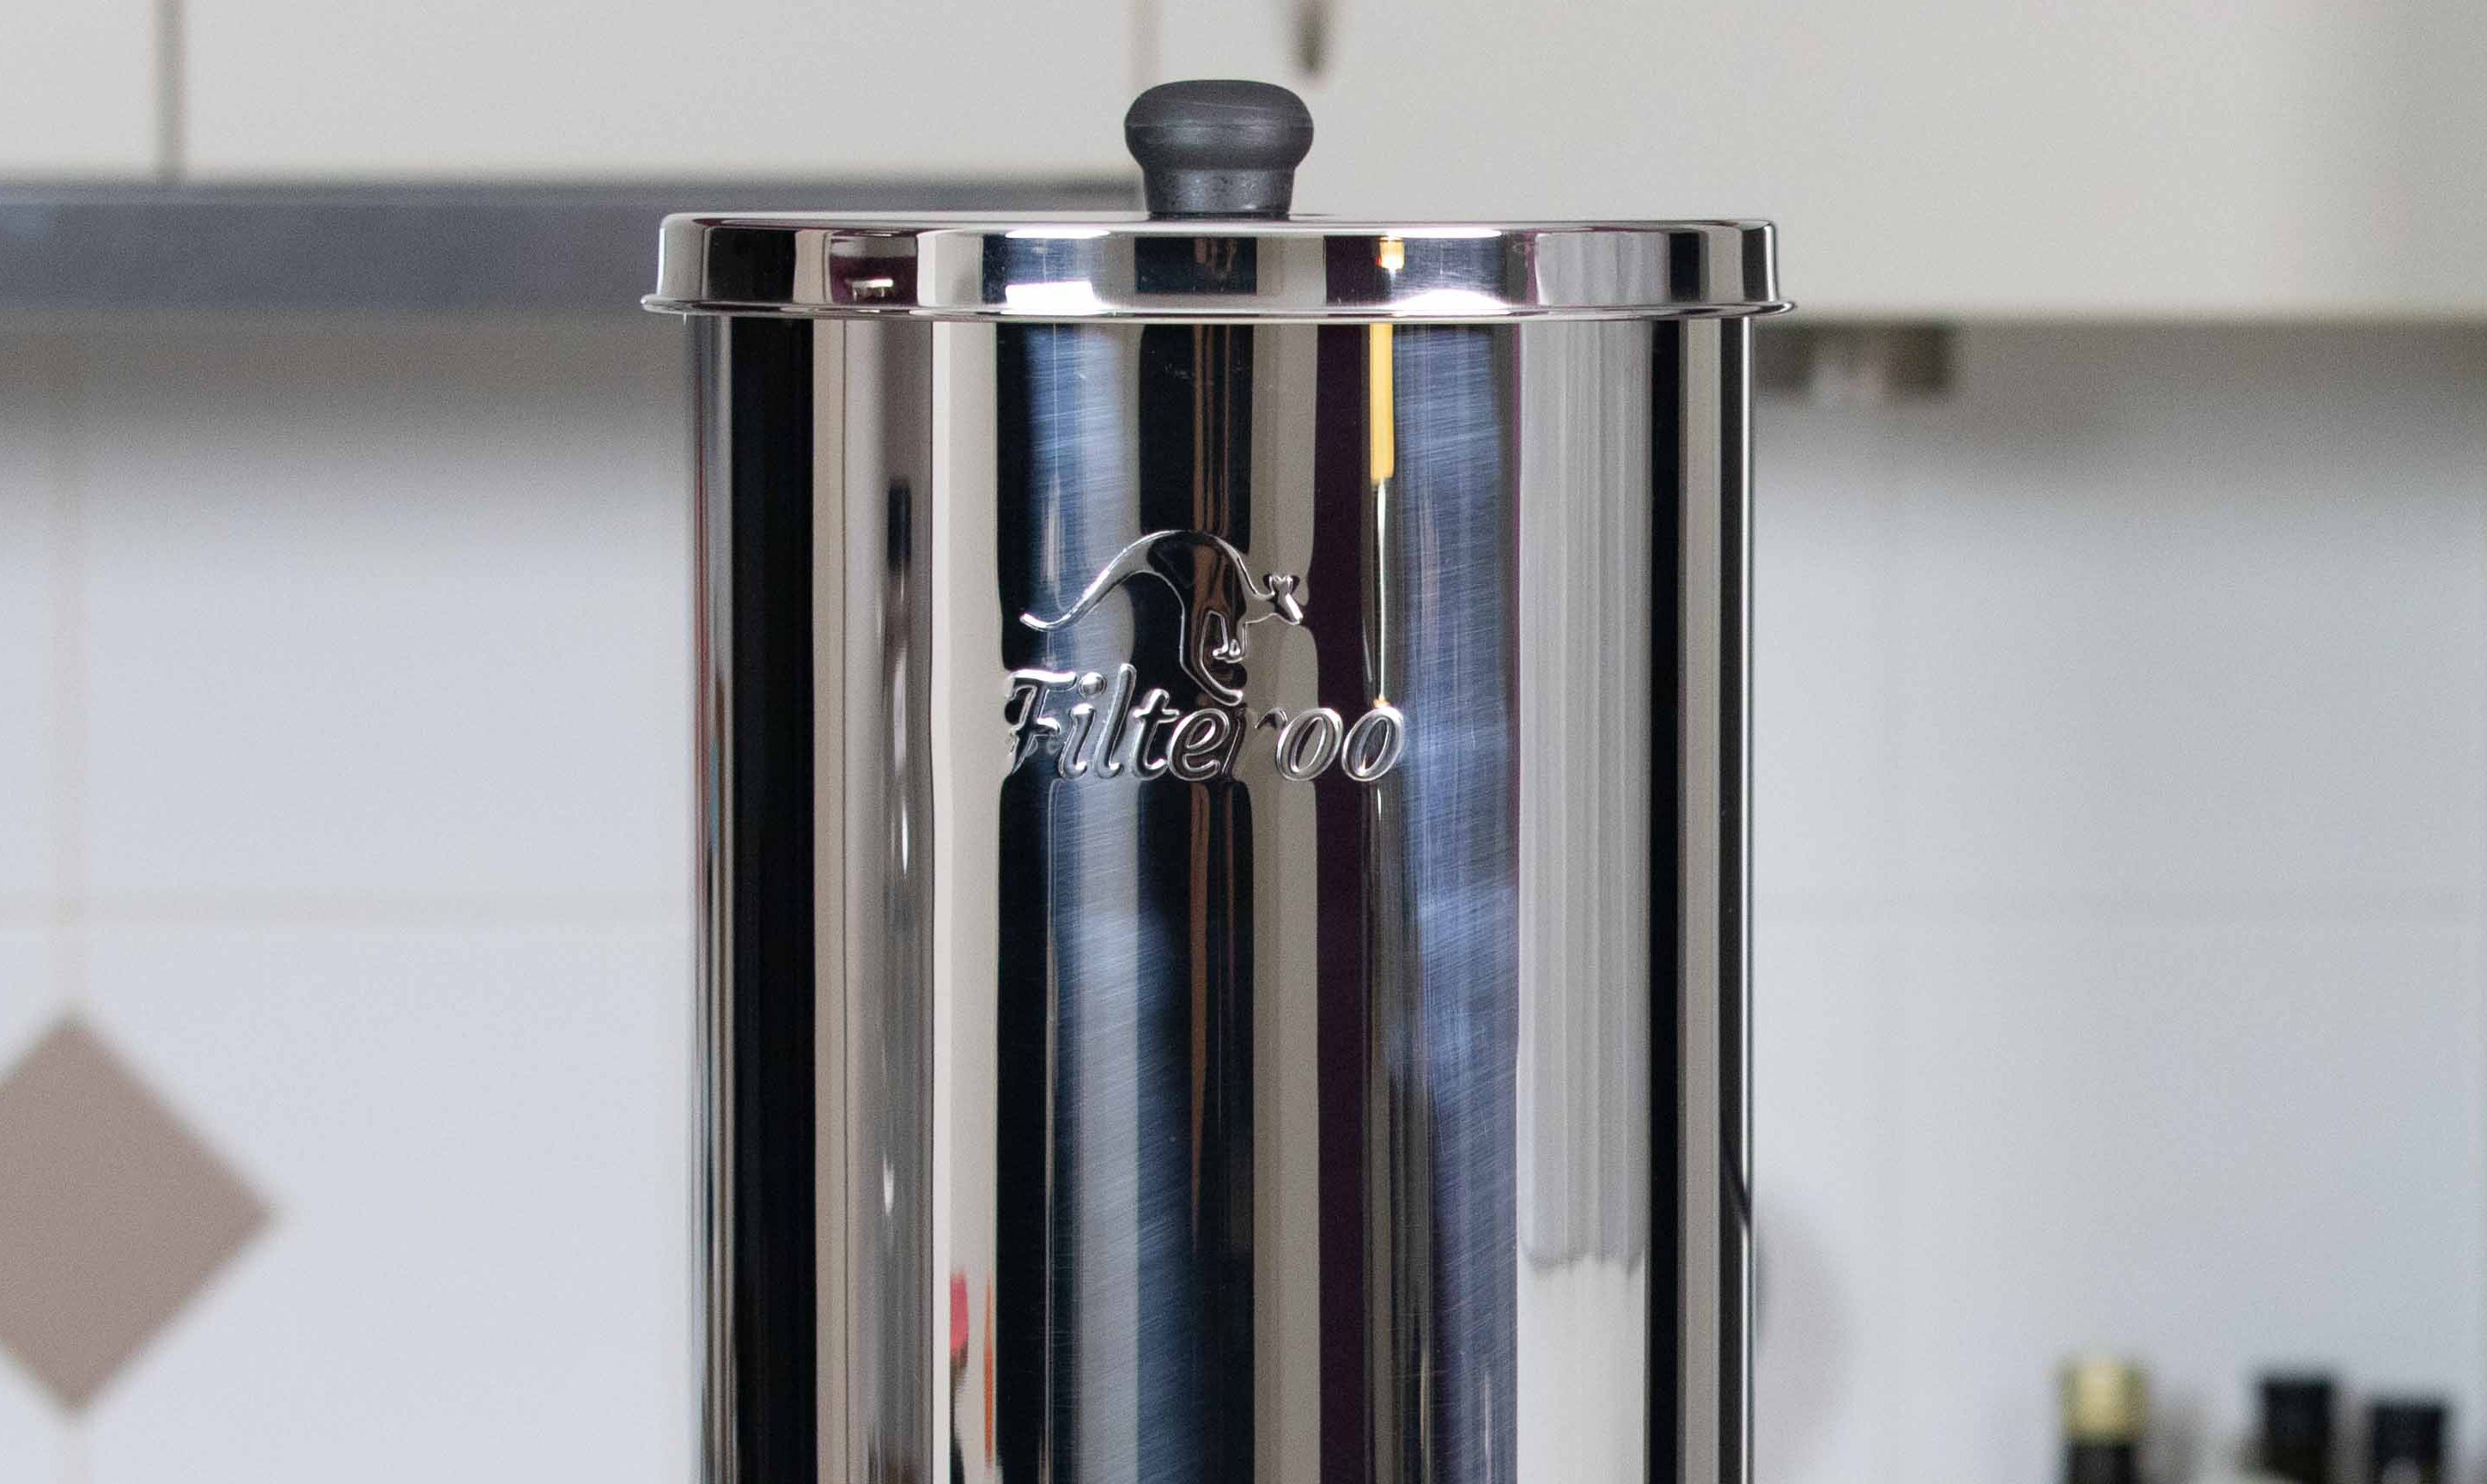 Filteroo® Superoo Stainless Steel Gravity Water Filter with Grander Revitalised Structured Water Energy